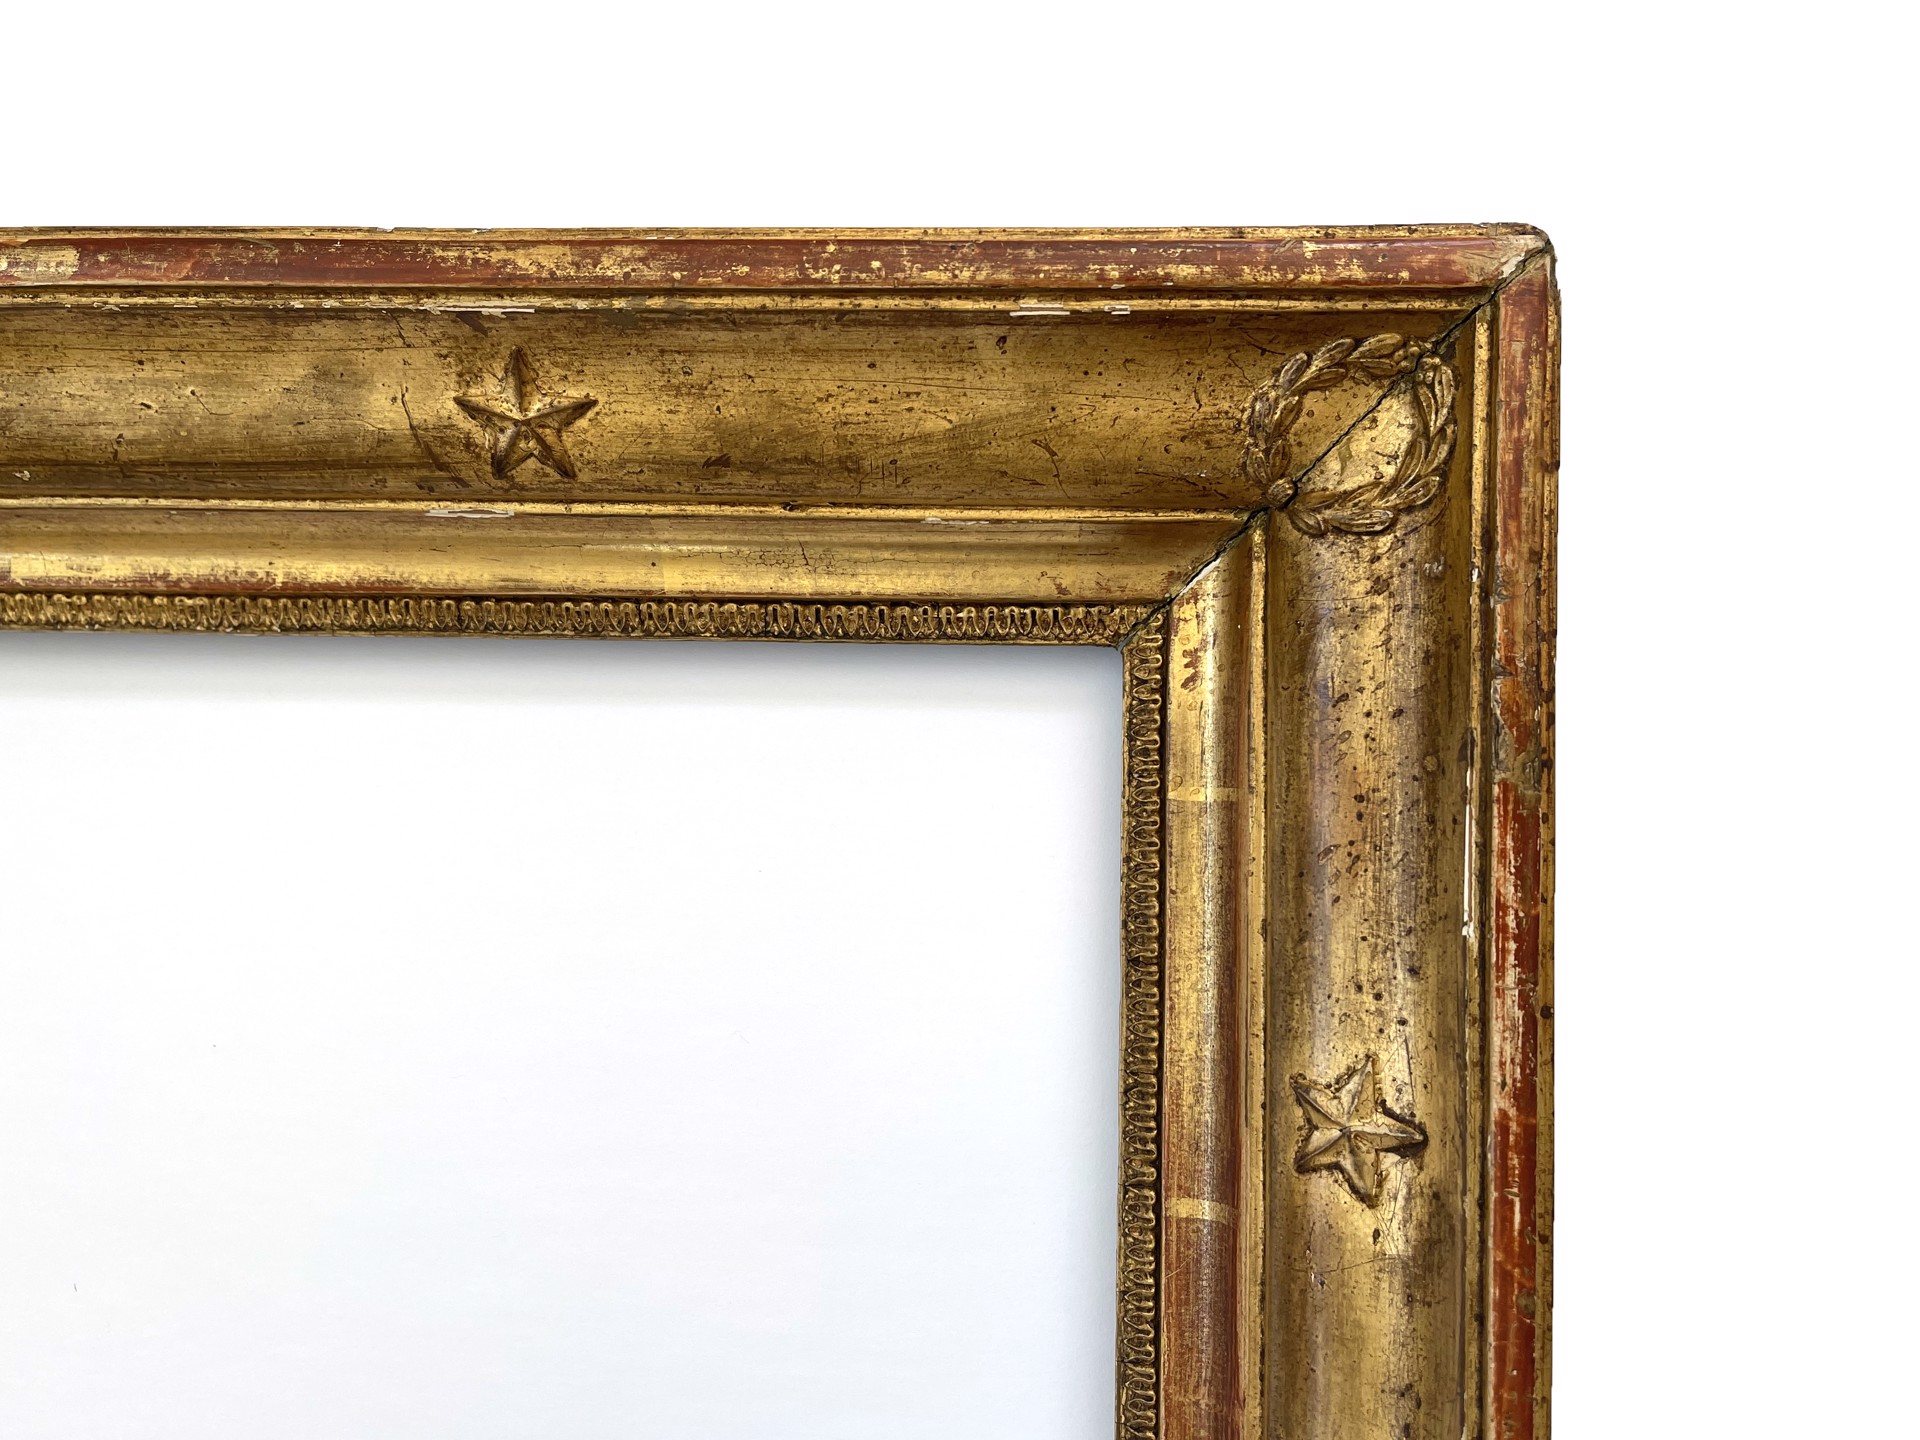 Antique, Gold Gilt, French Frame with Stars and Laurels by Antique Frame